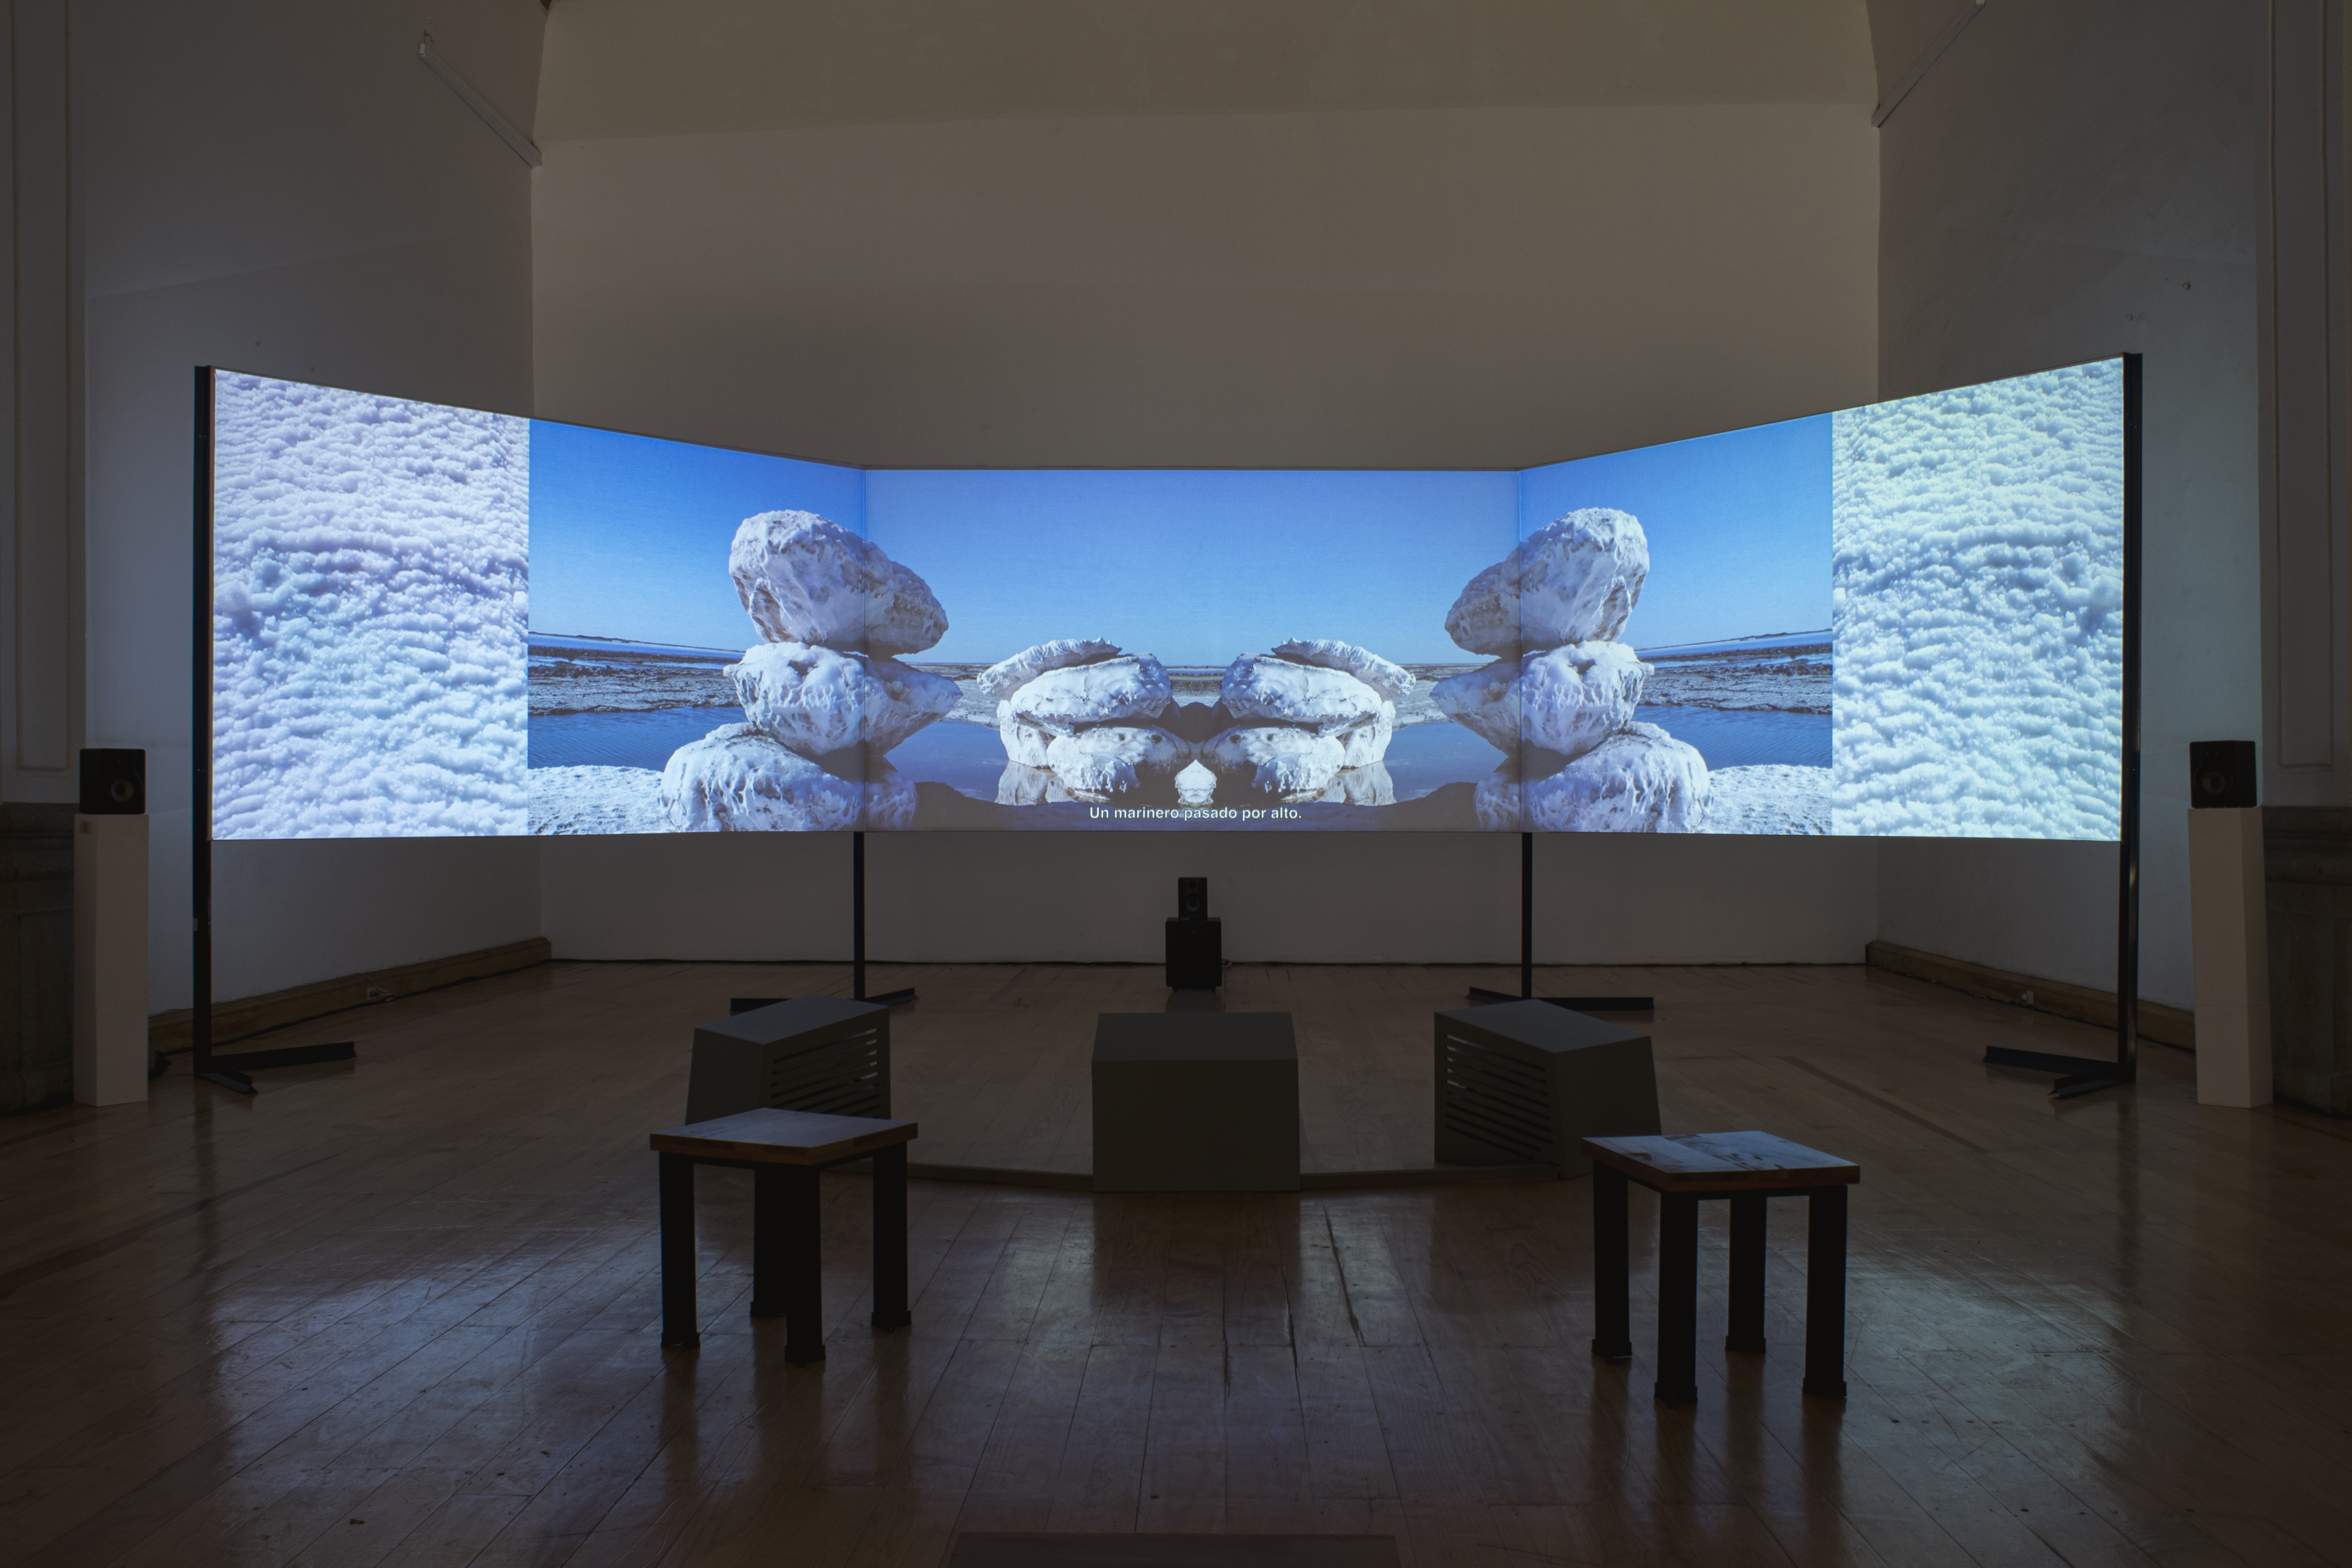 Large three-channel screen in a dark room. The images on the screen feature a body of water, snow, and what looks like large rocks stacked on top of one another. 